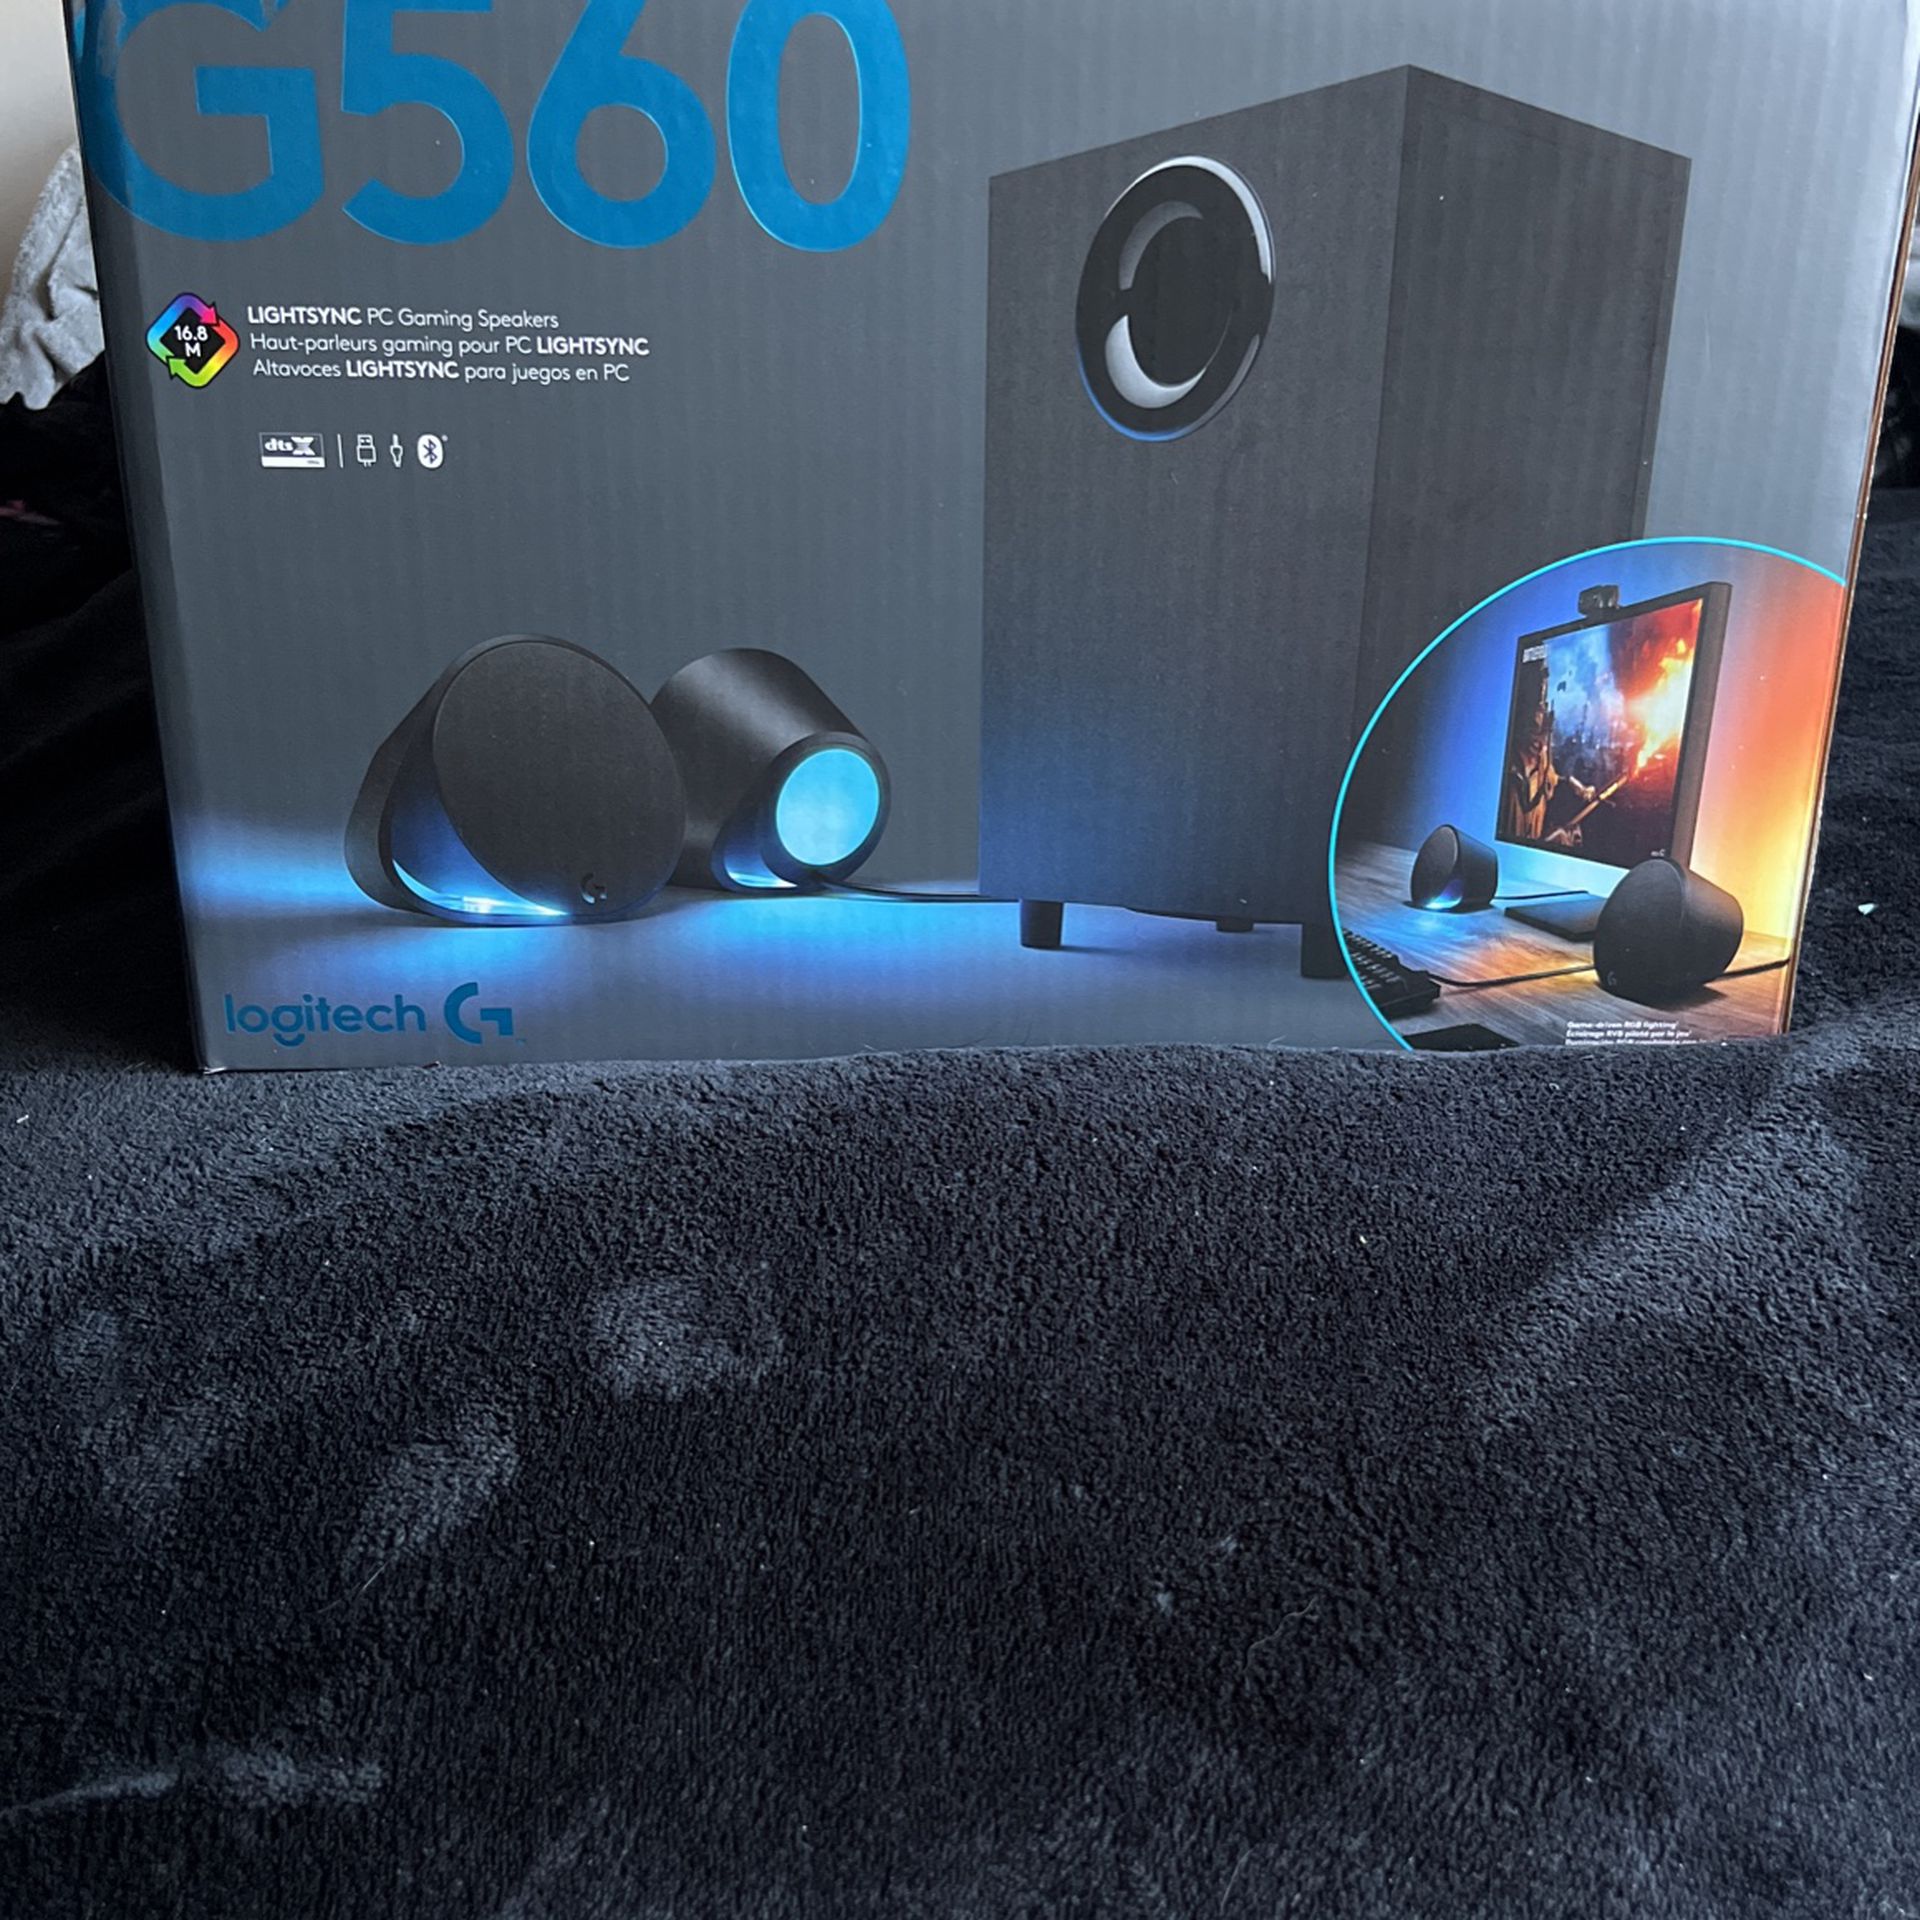 vedtage Disco Comorama Logitech G650 Light sync Pc Gaming Speaker for Sale in Oxnard, CA - OfferUp